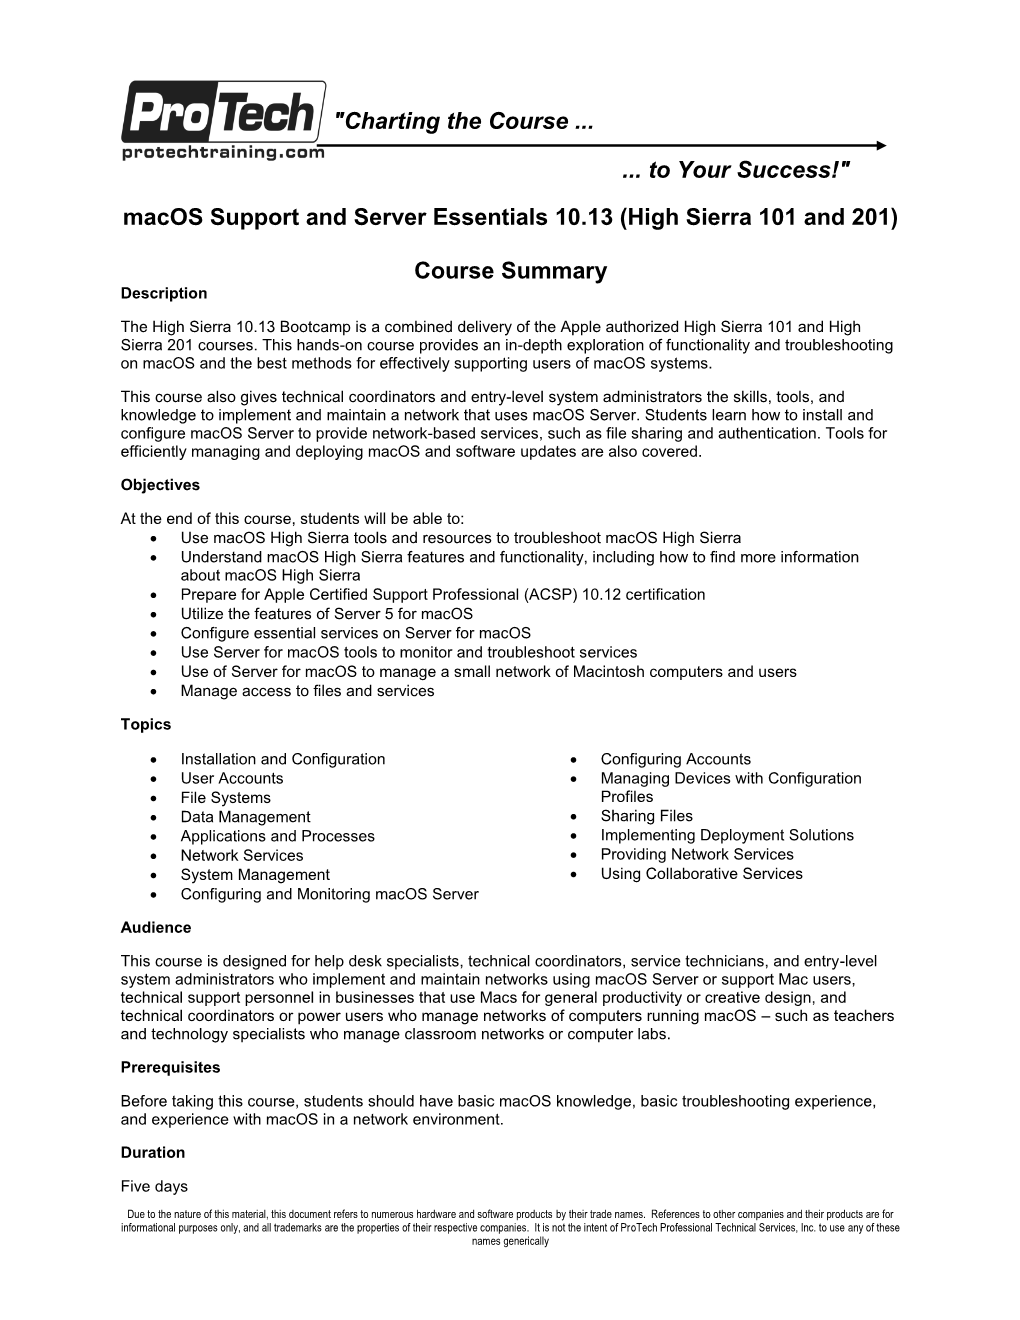 Macos Support and Server Essentials 10.13 (High Sierra 101 and 201)